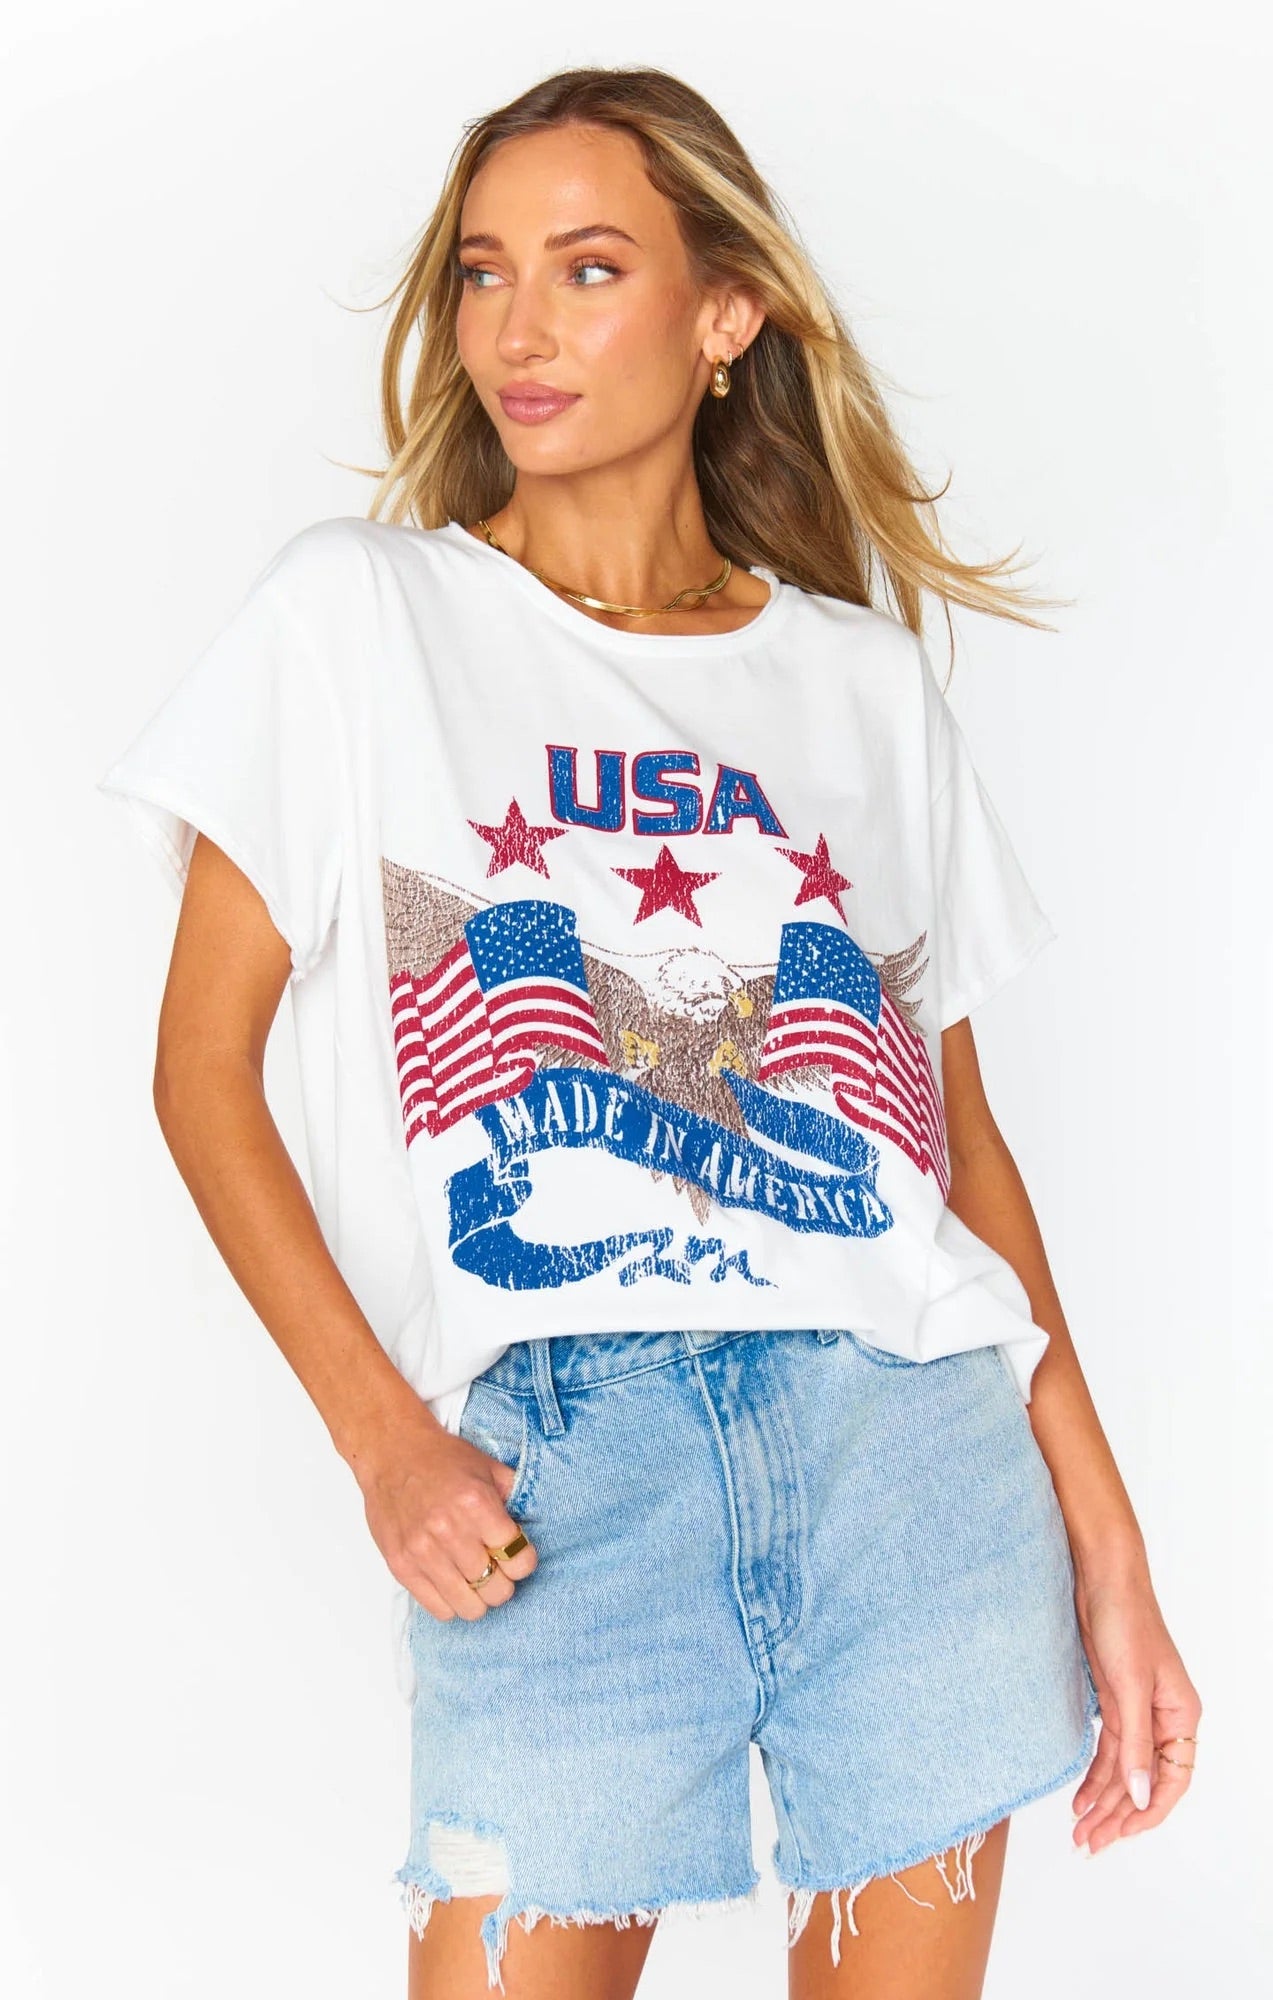 Airport Tee - Made In America